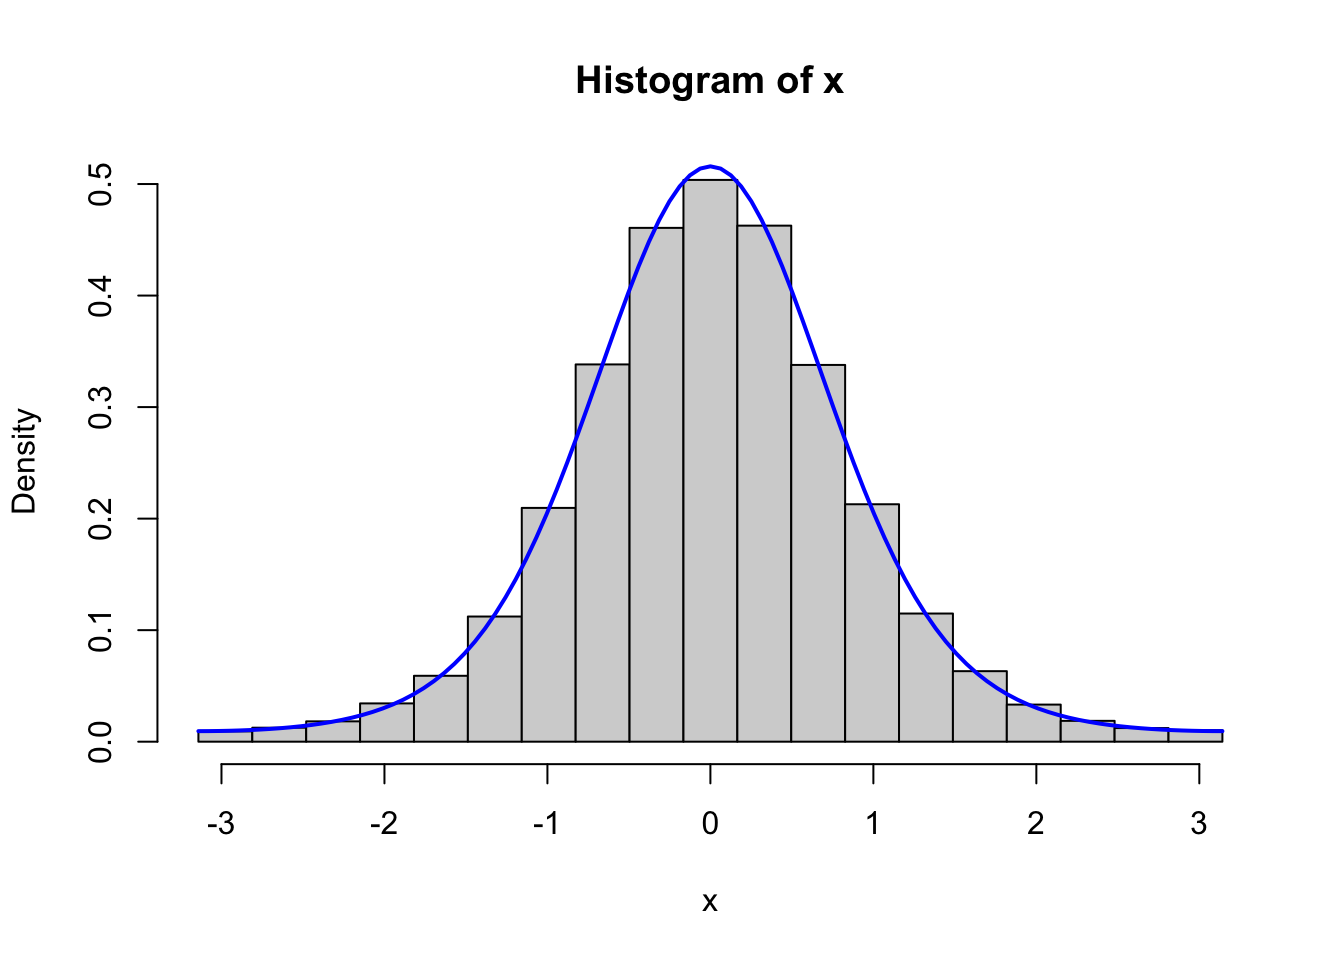 Histograms of 100,000 simulated data points from von Mises distributions with parameters \(\kappa = 0.5\) (left) and \(\kappa = 2\) (right), simulated using the Rcpp implementation (top) and the fully vectorized R implementation (bottom).